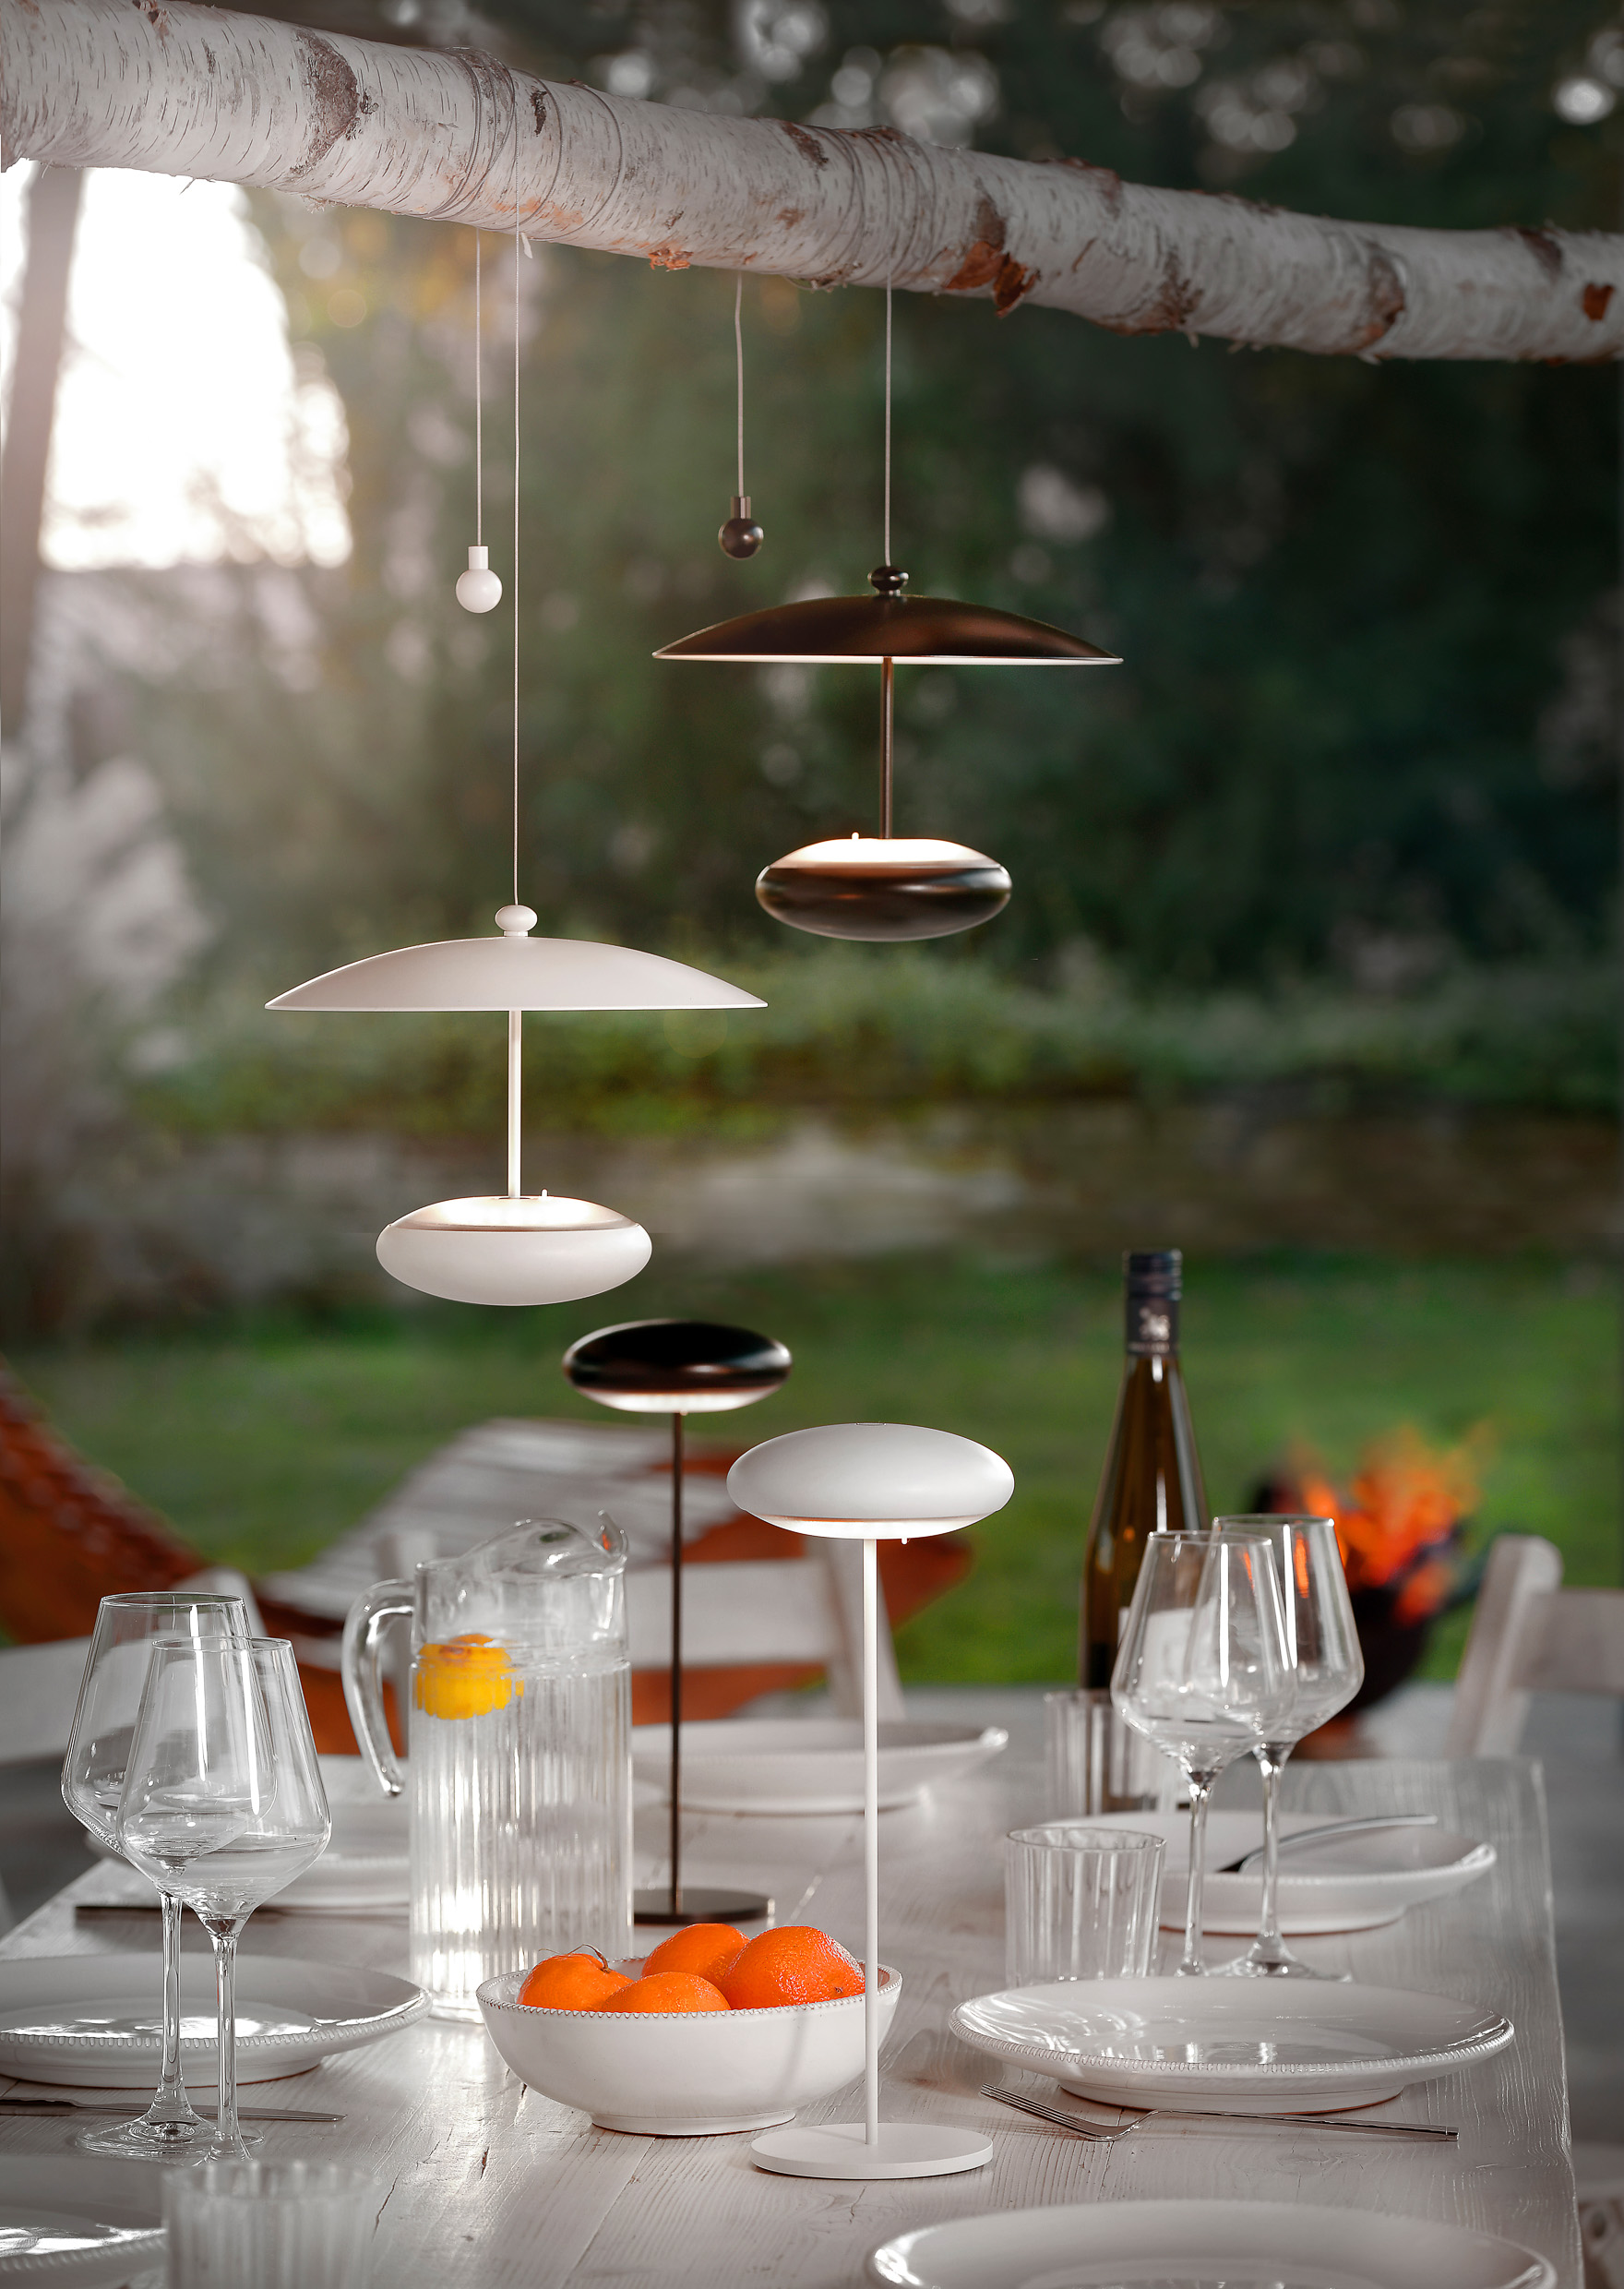 SOMPEX // FLYER - OUTDOOR BATTERY LAMP - TABLE- & PENDANT LAMP | BLACK